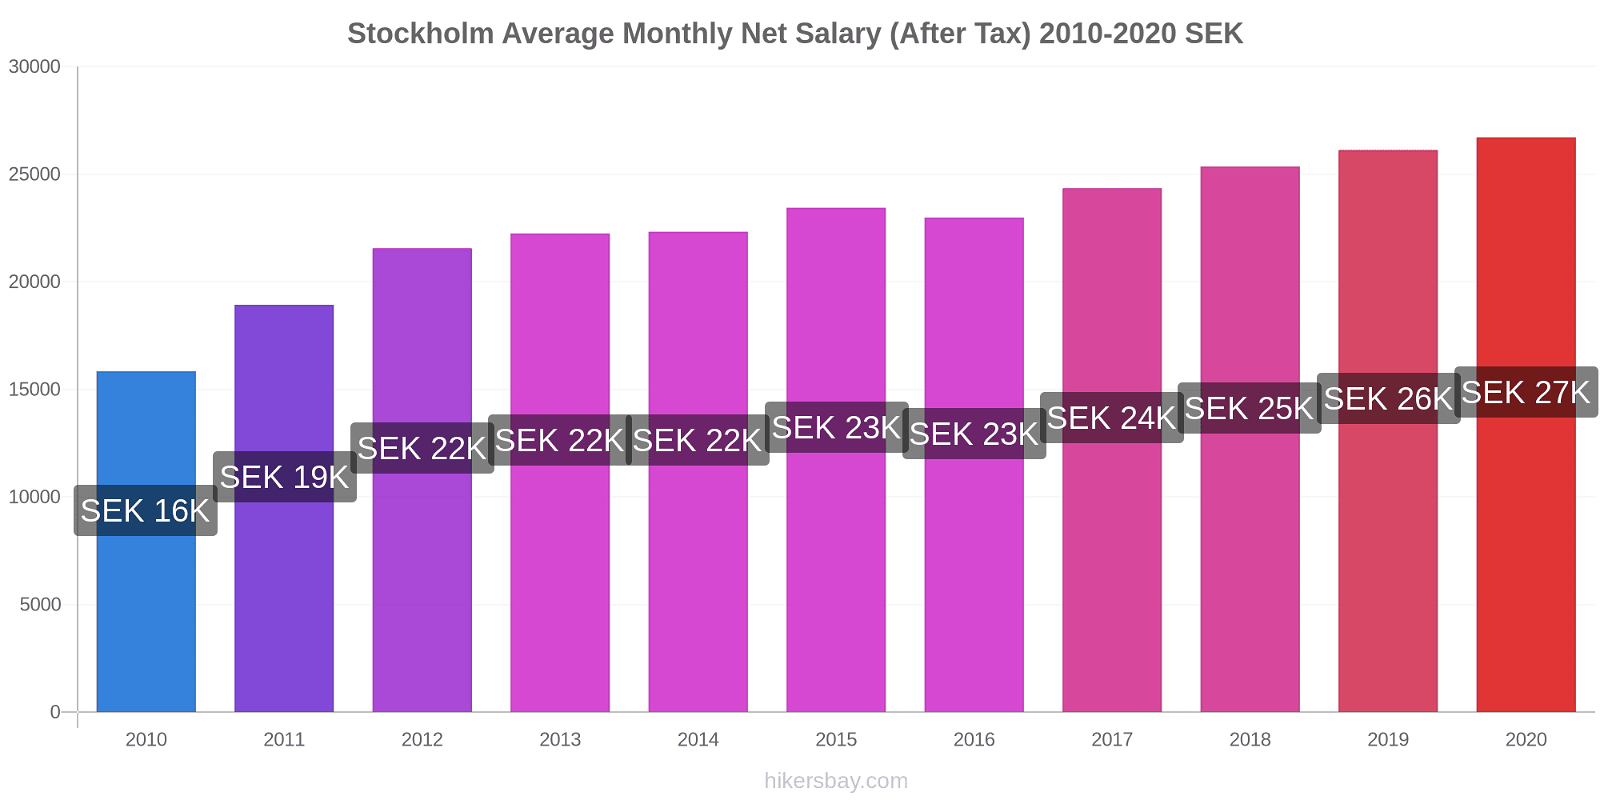 Stockholm price changes Average Monthly Net Salary (After Tax) hikersbay.com